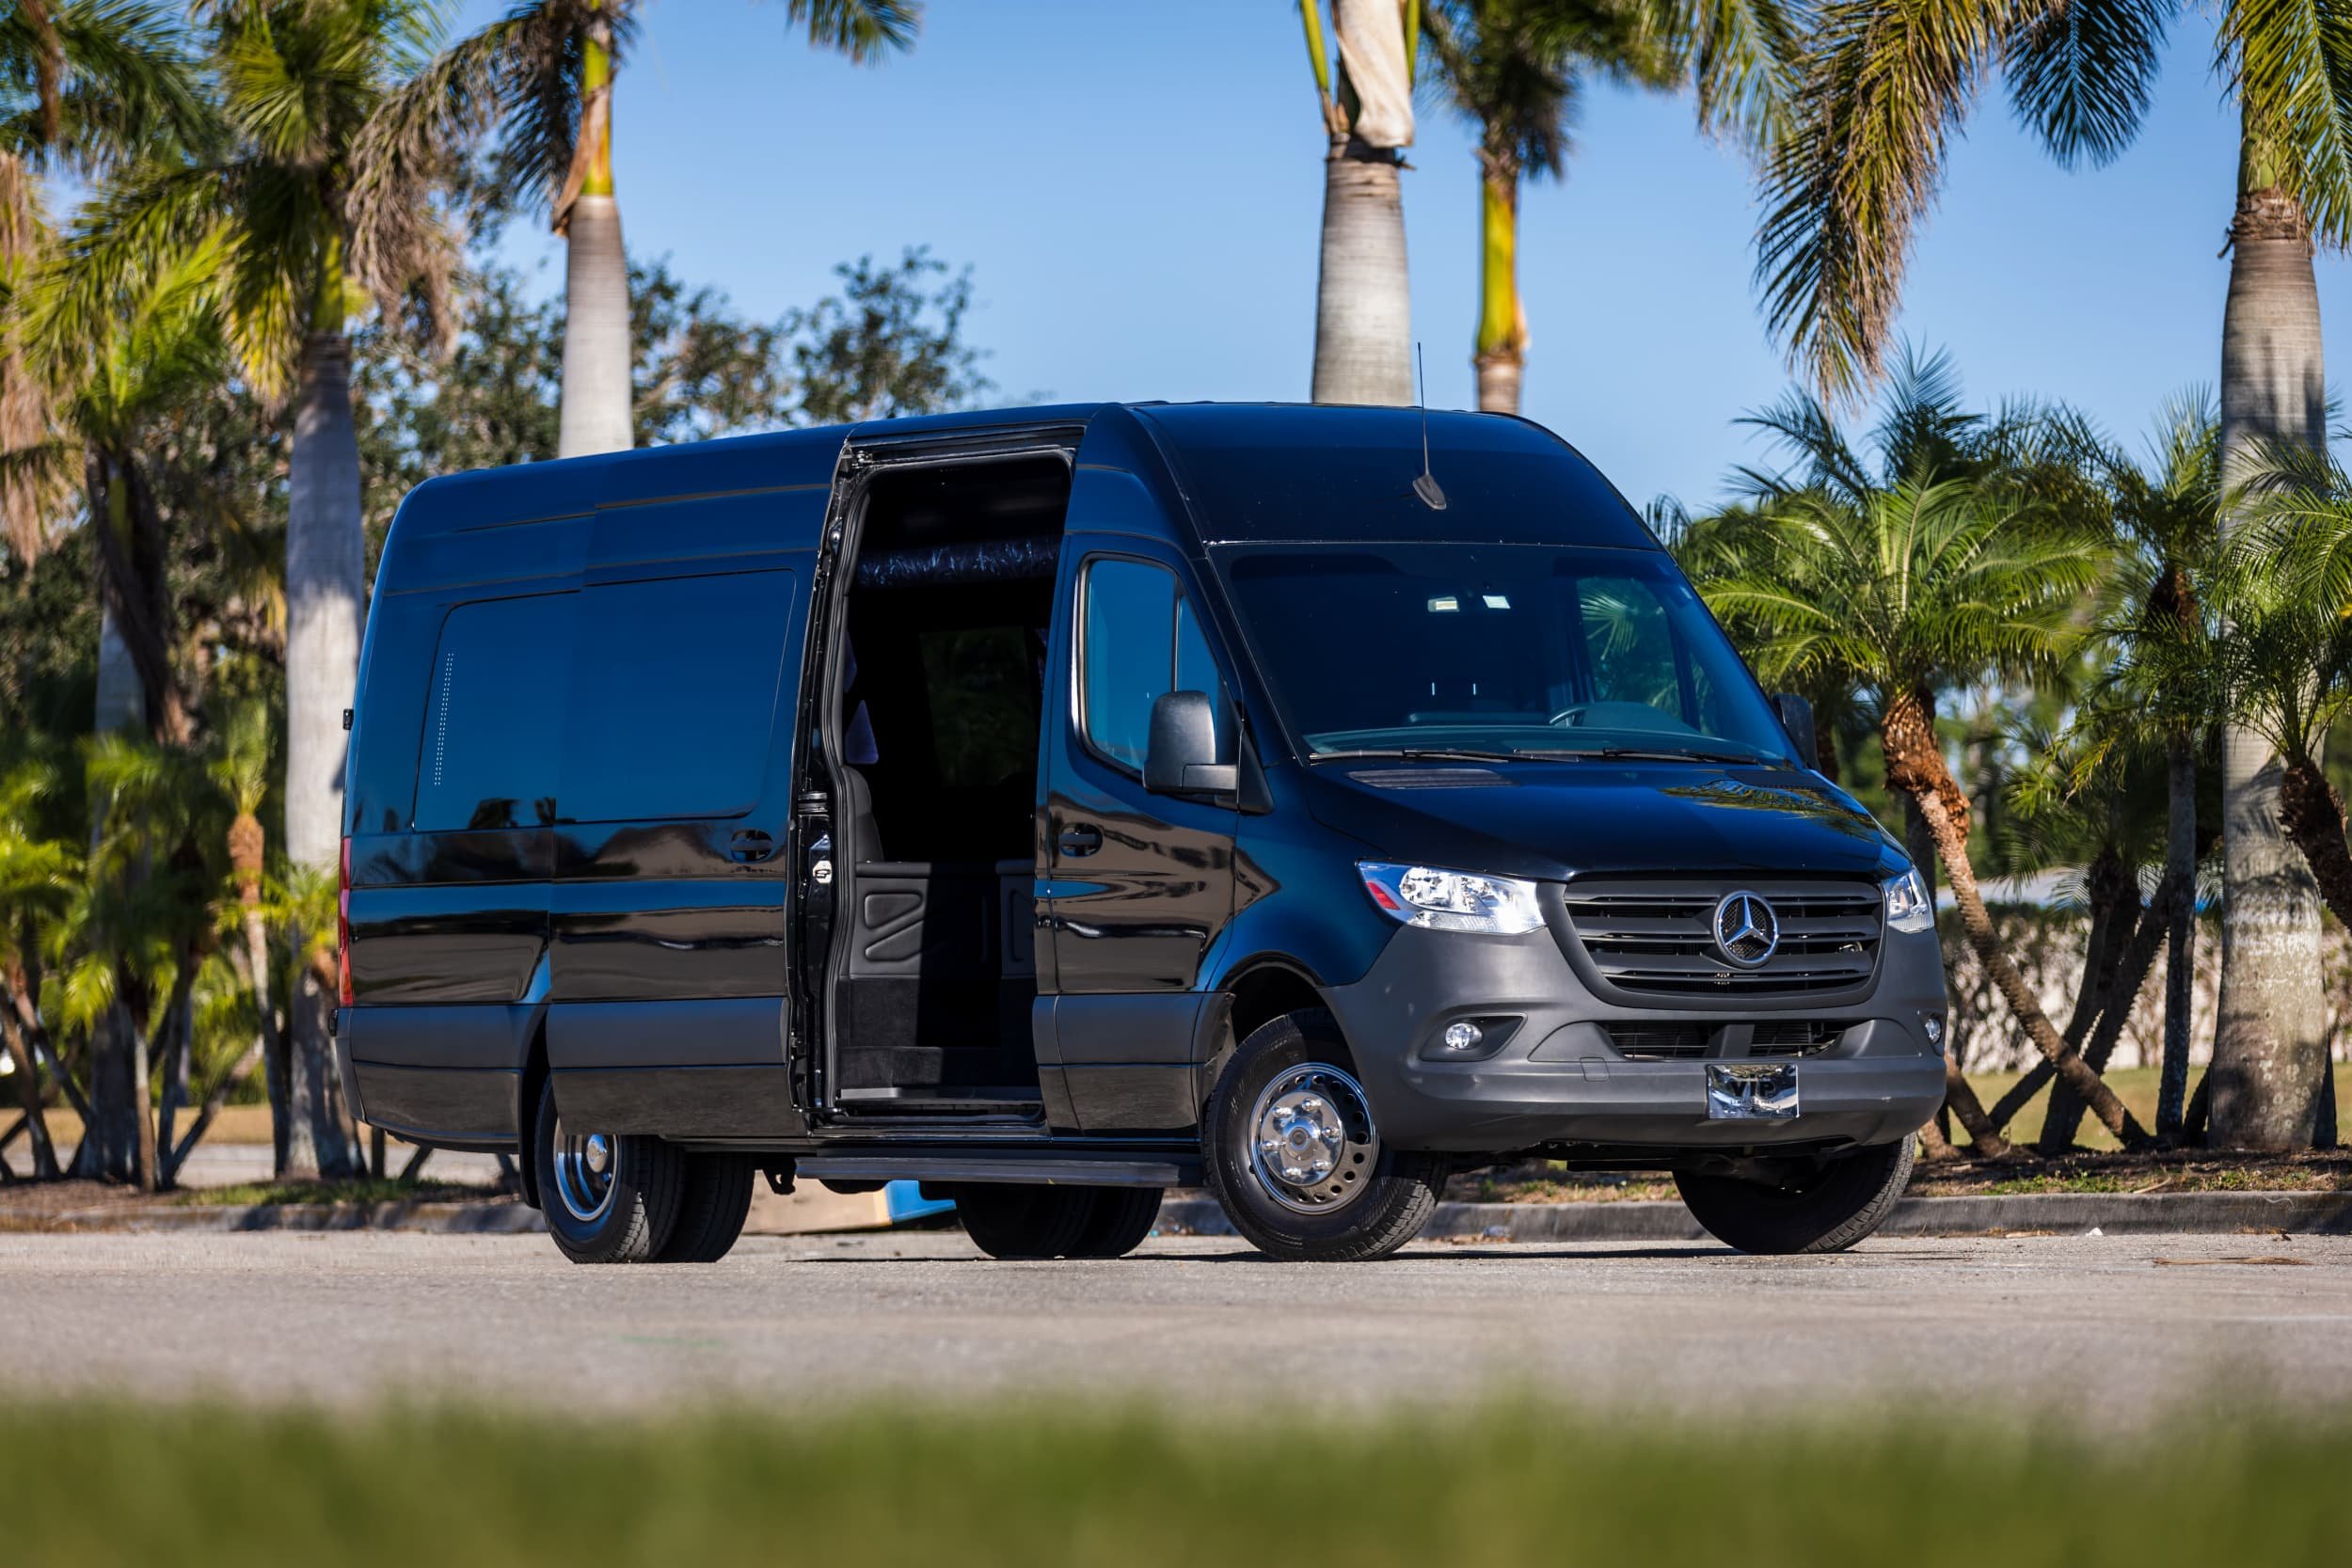 VIP Limo Service: Mercedez Limo Party Bus I